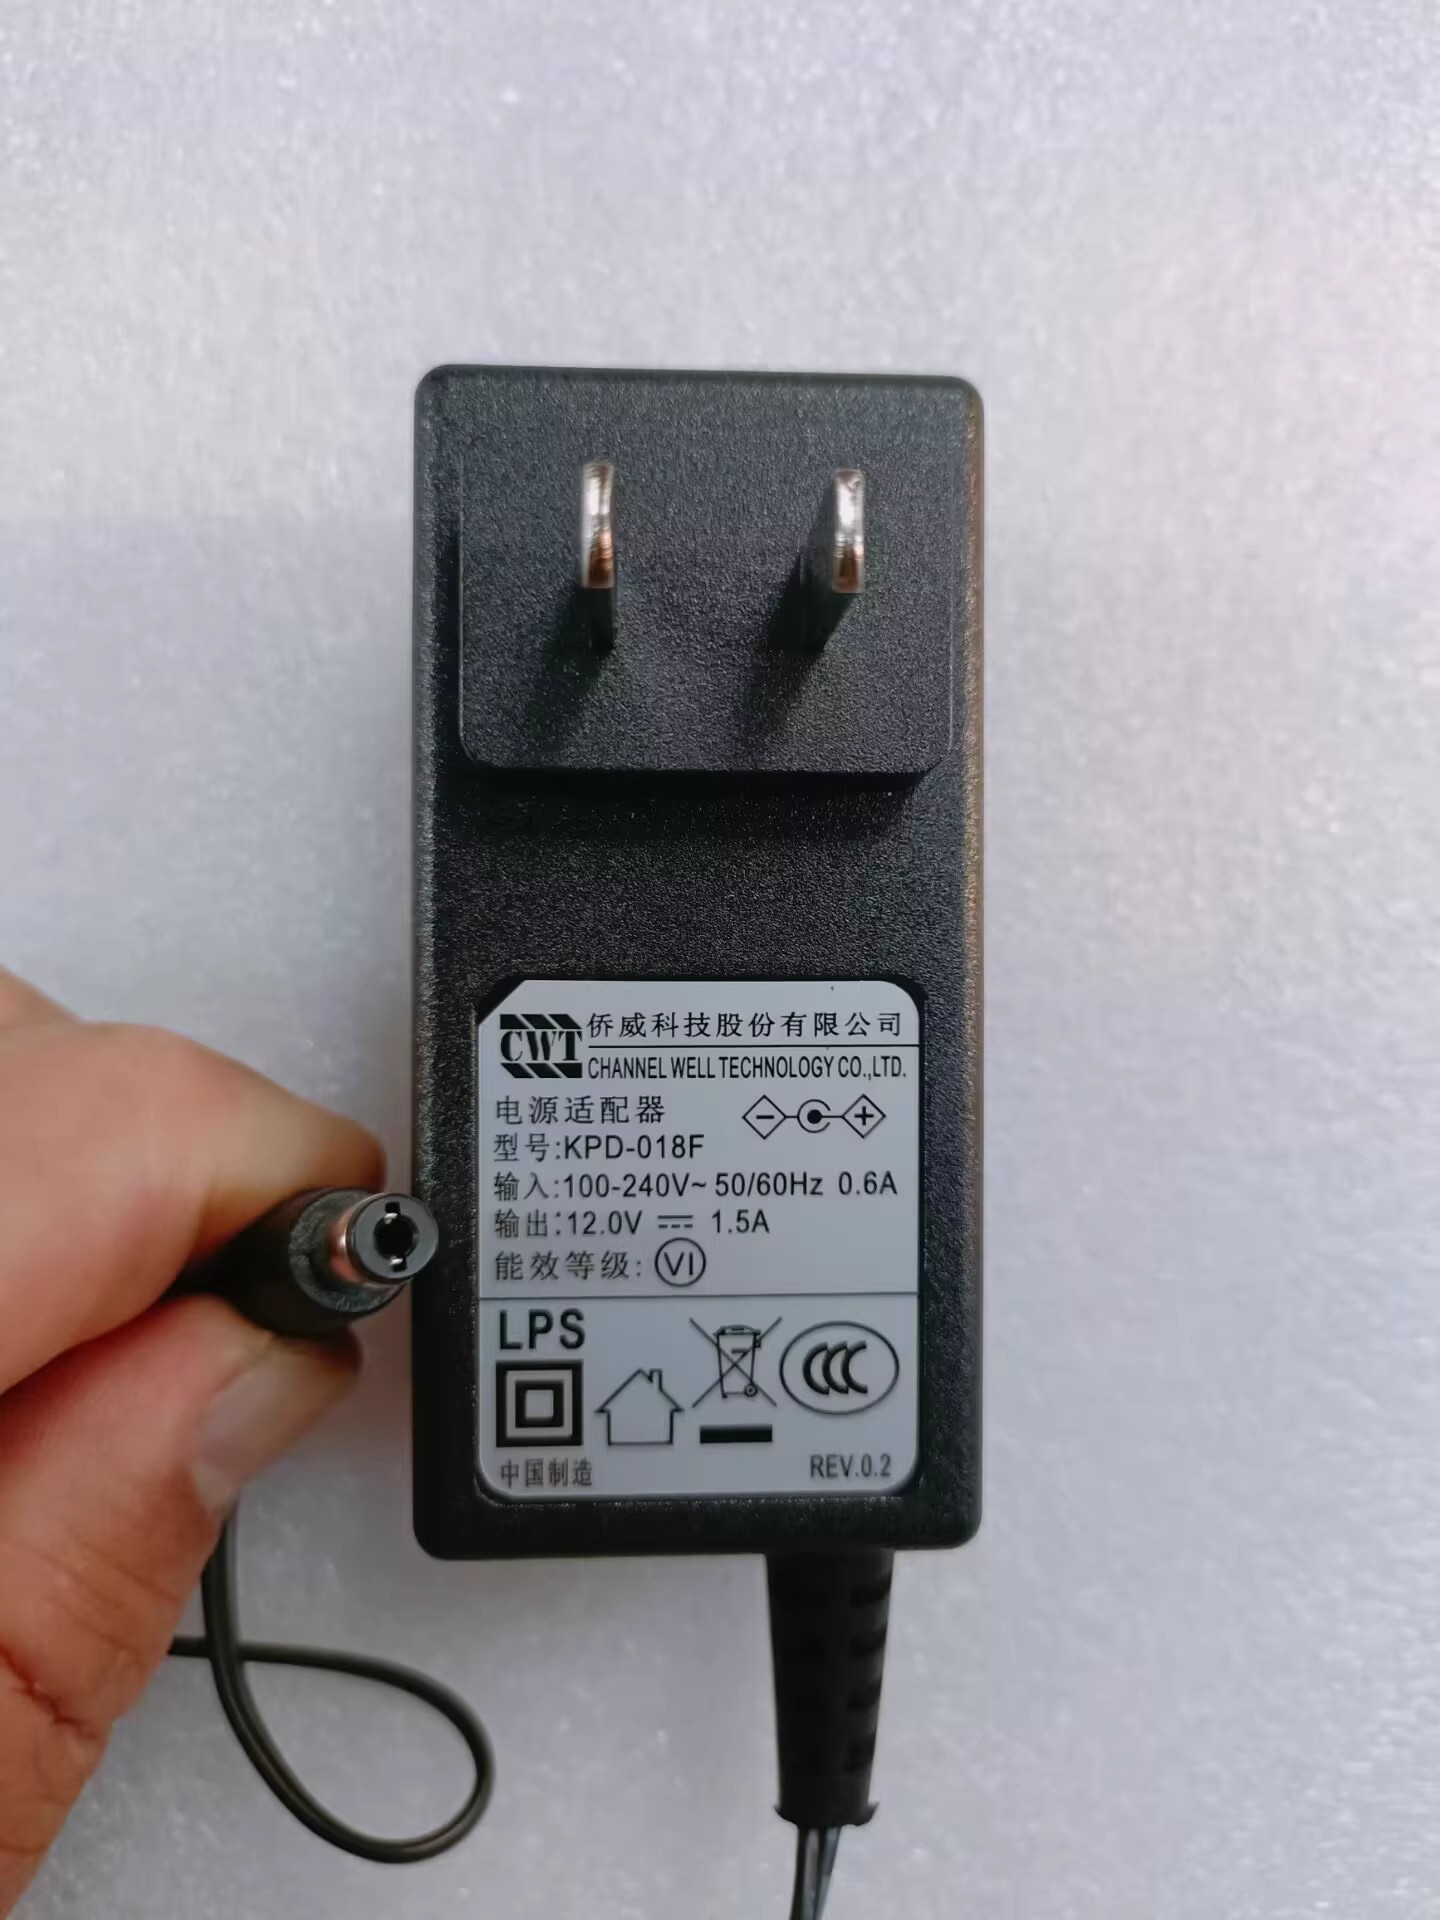 *Brand NEW* KPD-018F CWT 12V 1.5A AC DC ADAPTHE POWER Supply